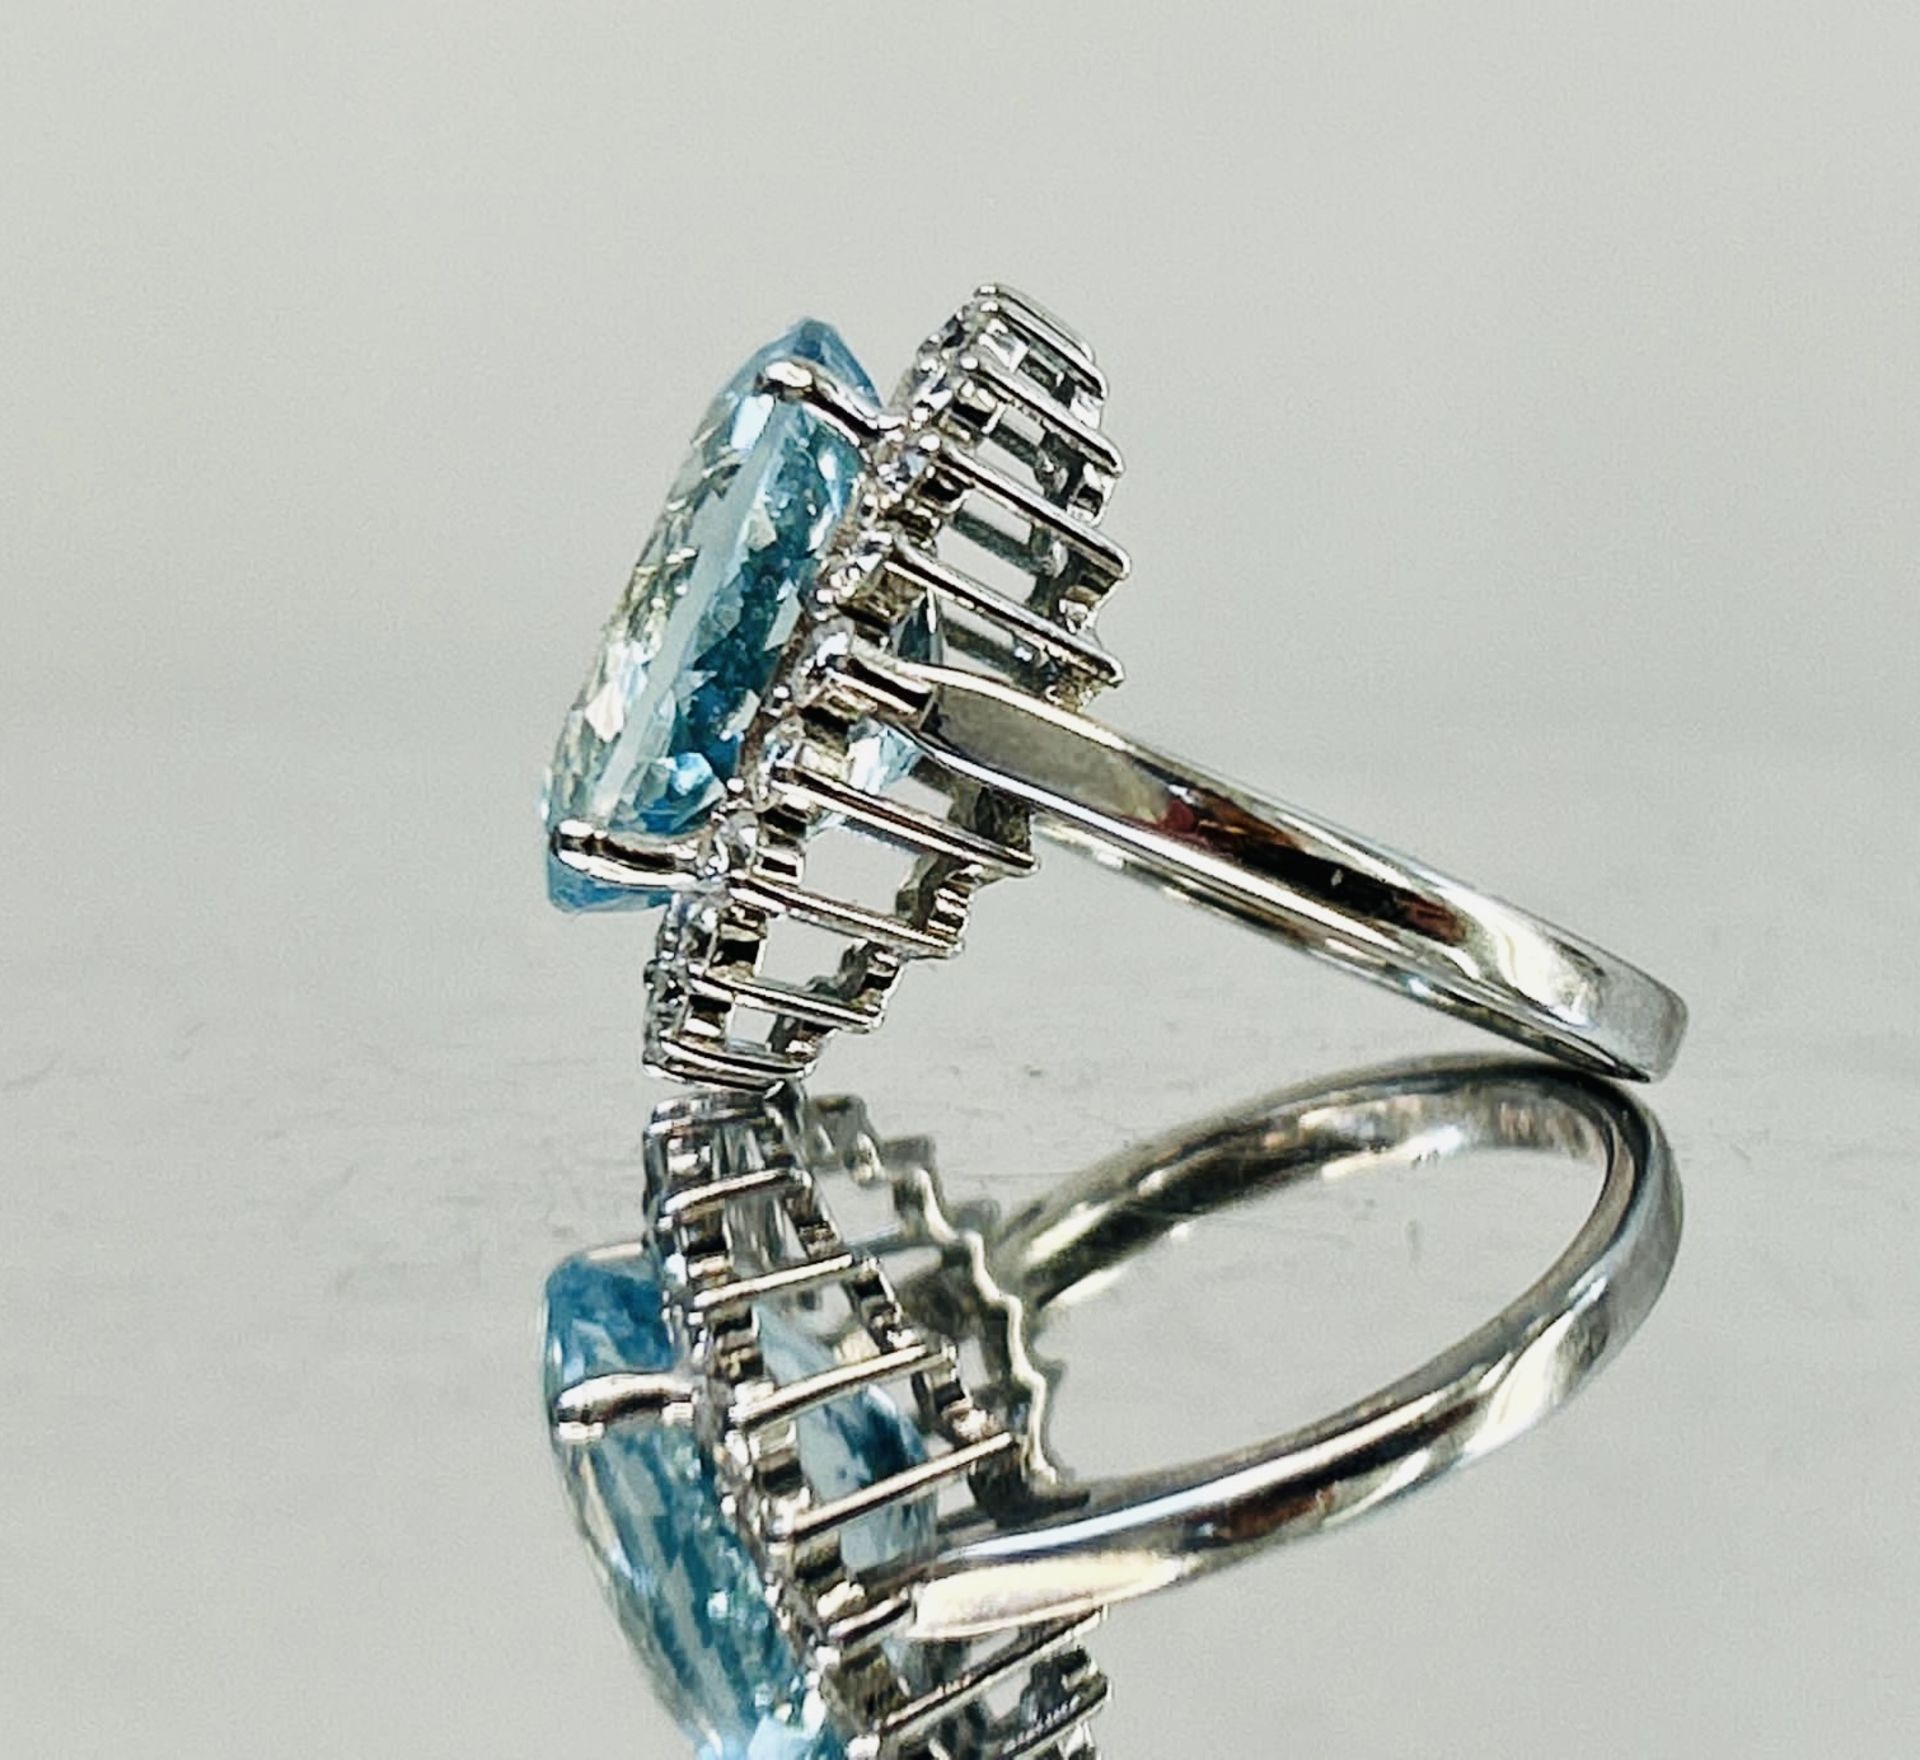 Beautiful Natural Flawless 7.30 CT Aquamarine Ring With Diamonds and 18k Gold - Image 5 of 7